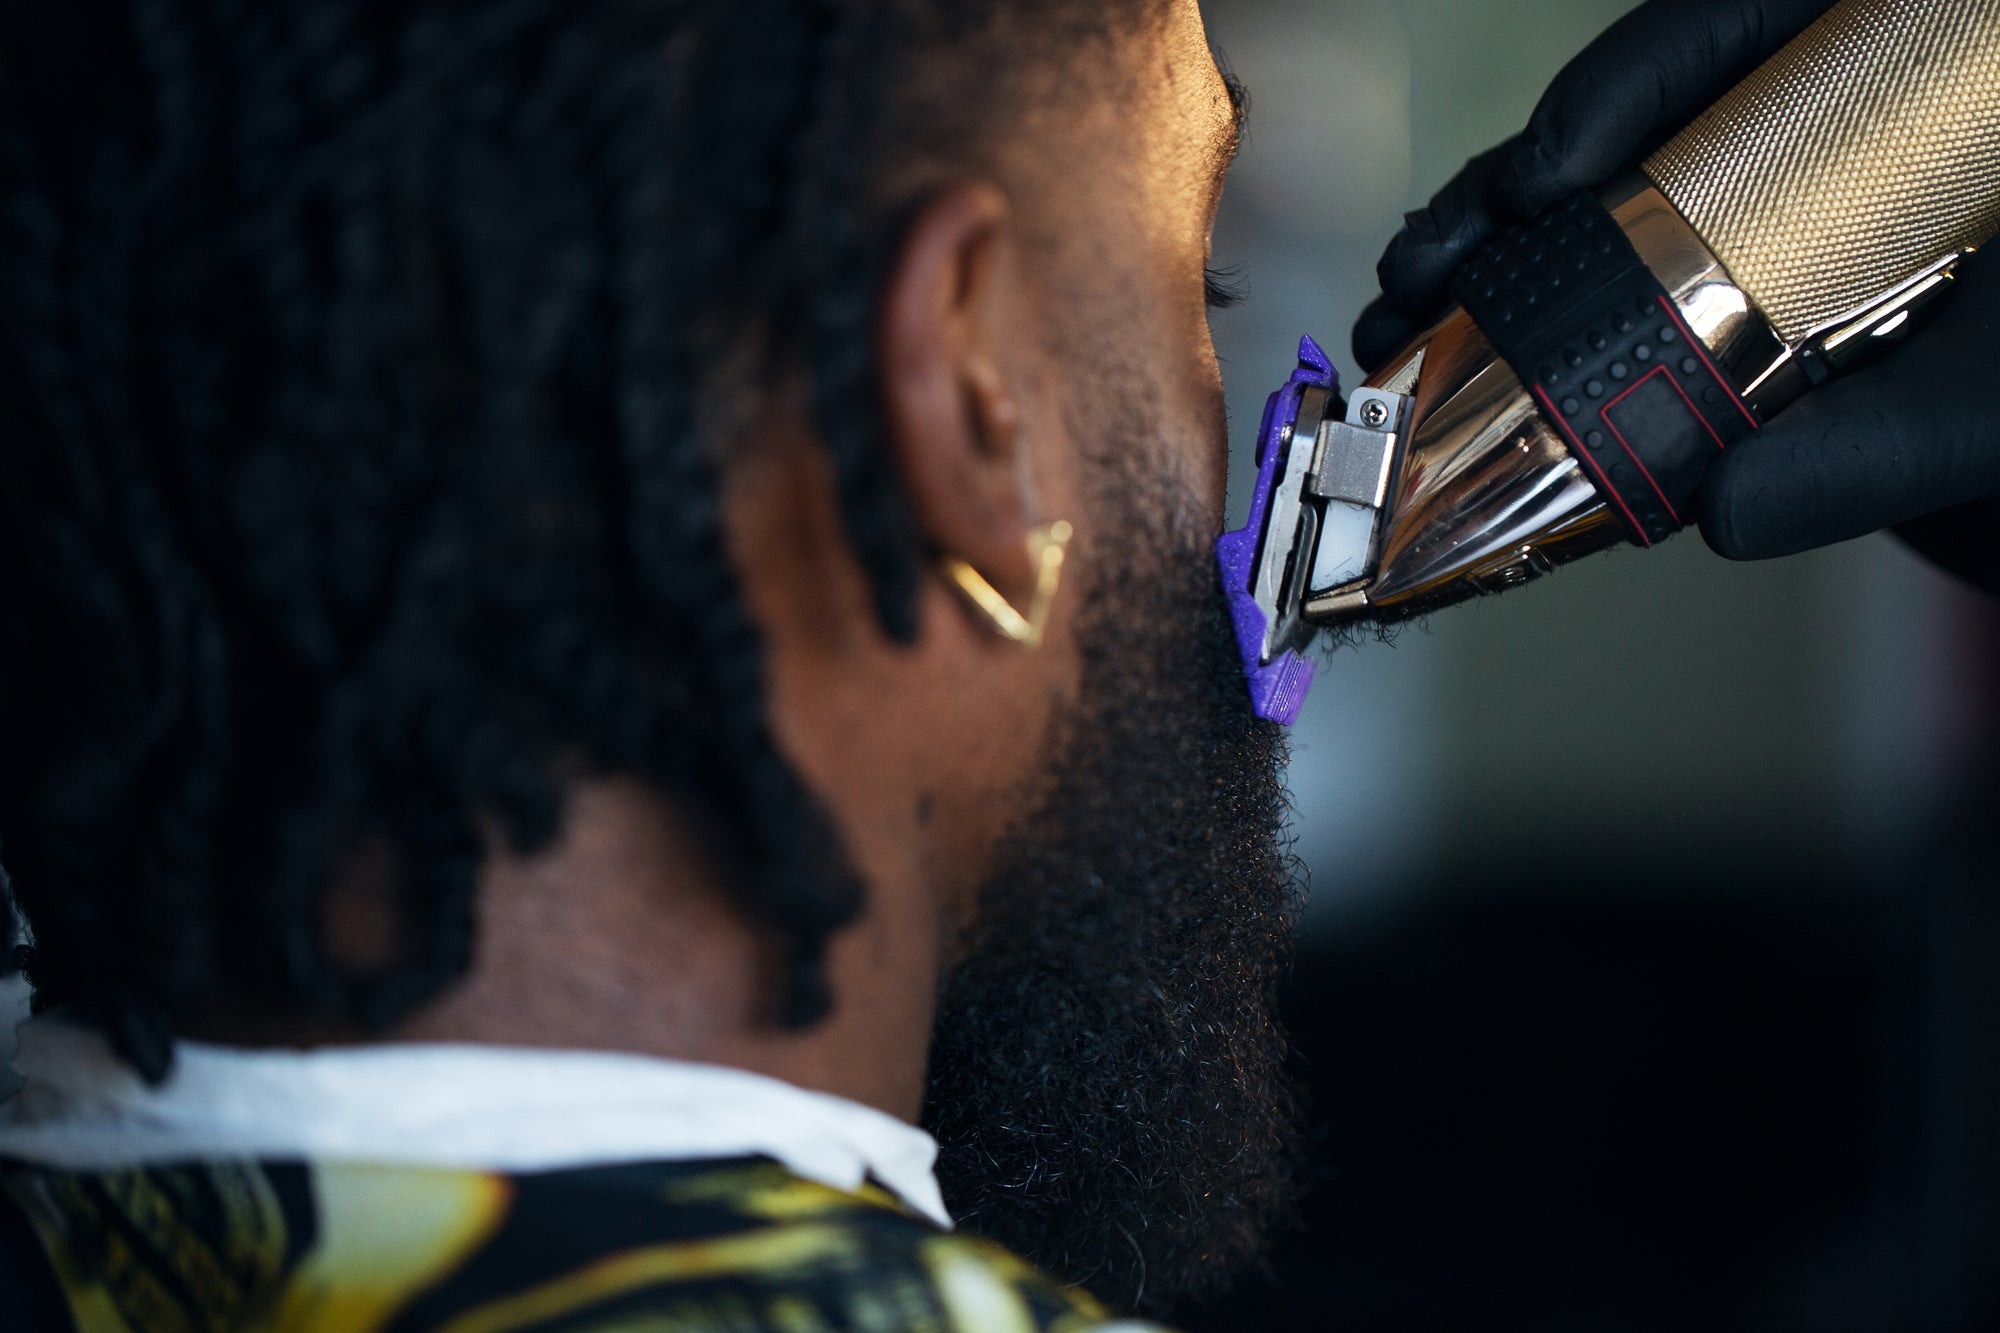 Shop high-quality barber tools, equipment, and grooming products Online